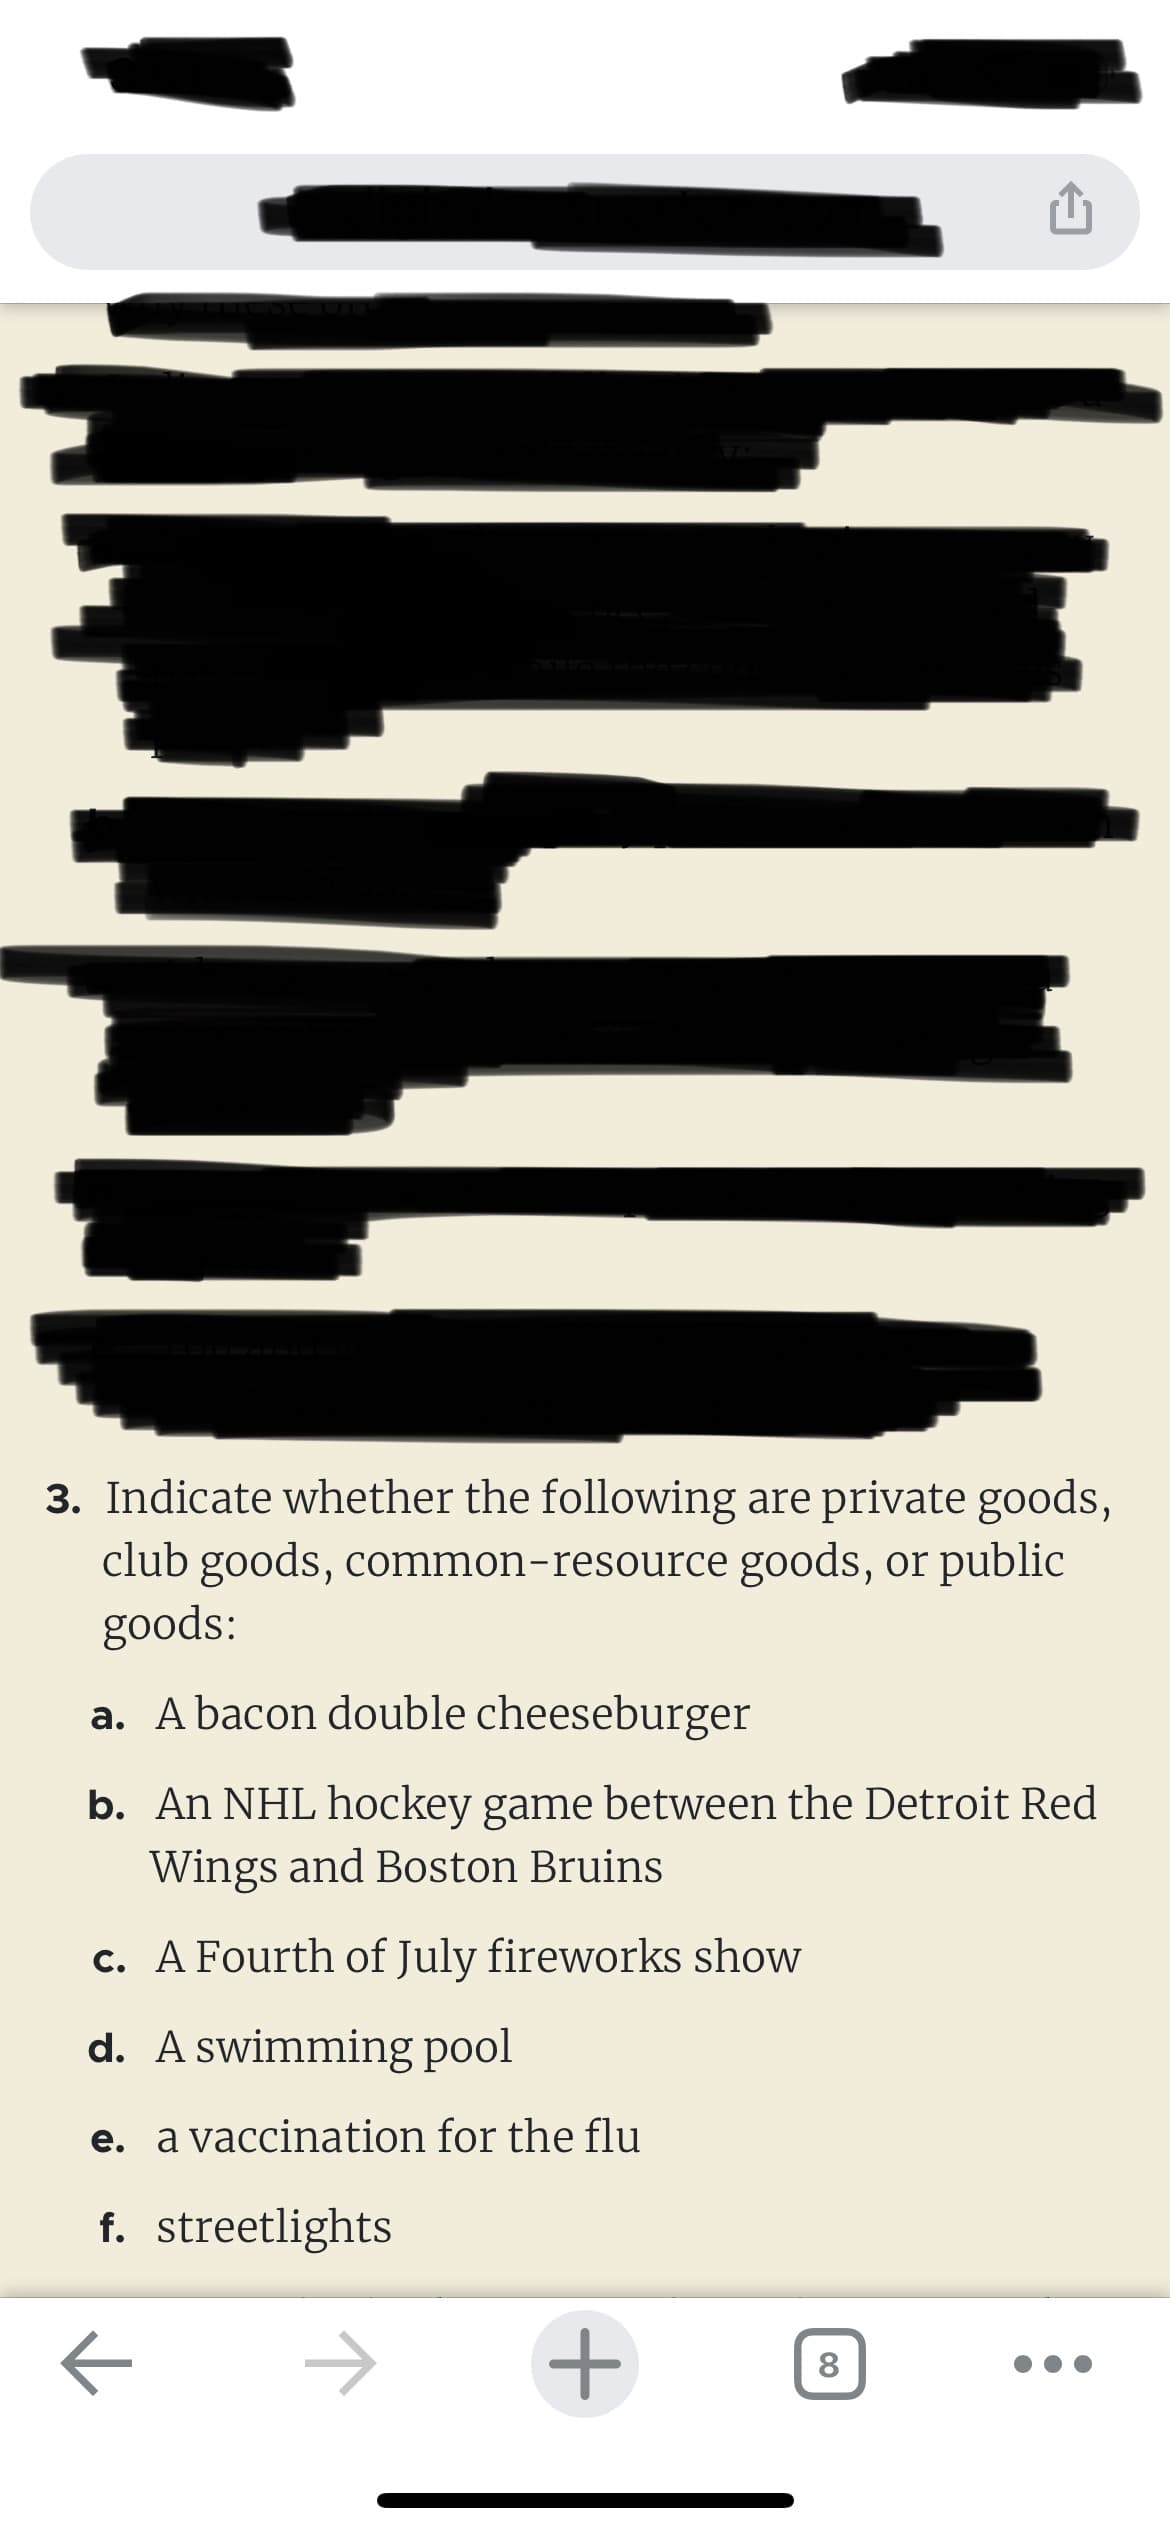 3. Indicate whether the following are private goods,
club goods, common-resource goods, or public
goods:
a. A bacon double cheeseburger
b. An NHL hockey game between the Detroit Red
Wings and Boston Bruins
c. A Fourth of July fireworks show
d. A swimming pool
e. a vaccination for the flu
f. streetlights
←
+
00
8